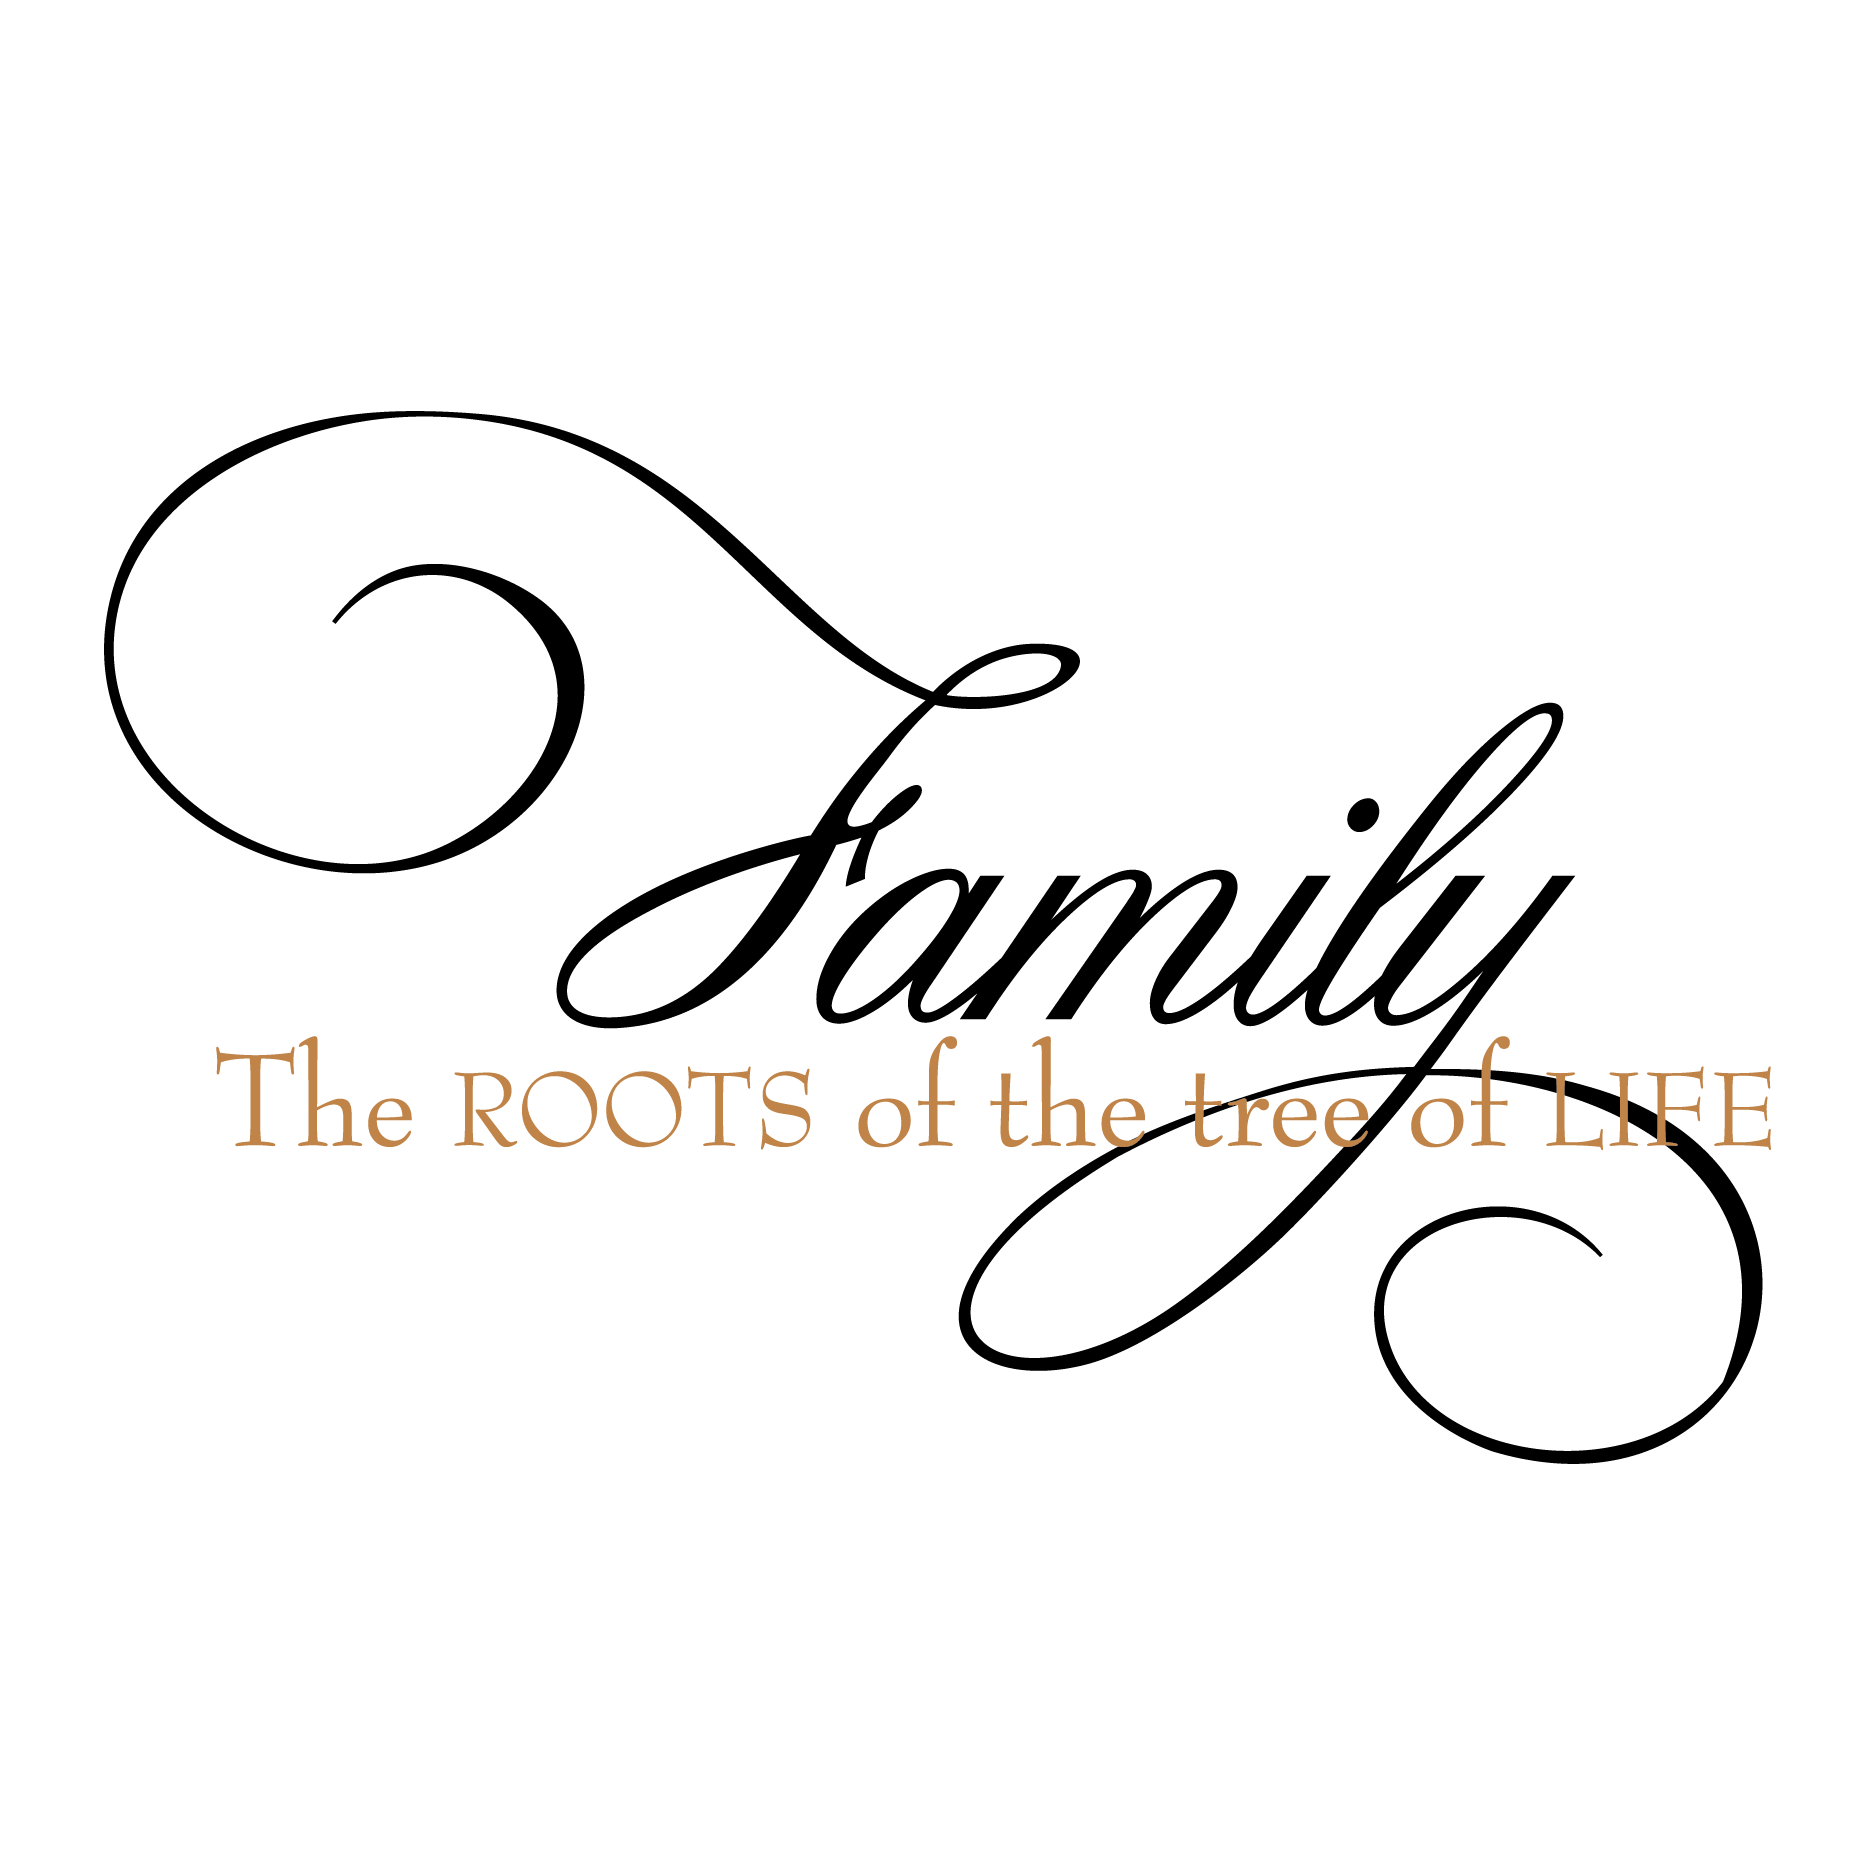 Roots of the Tree of Life Wall Quotes™ Decal | WallQuotes.com